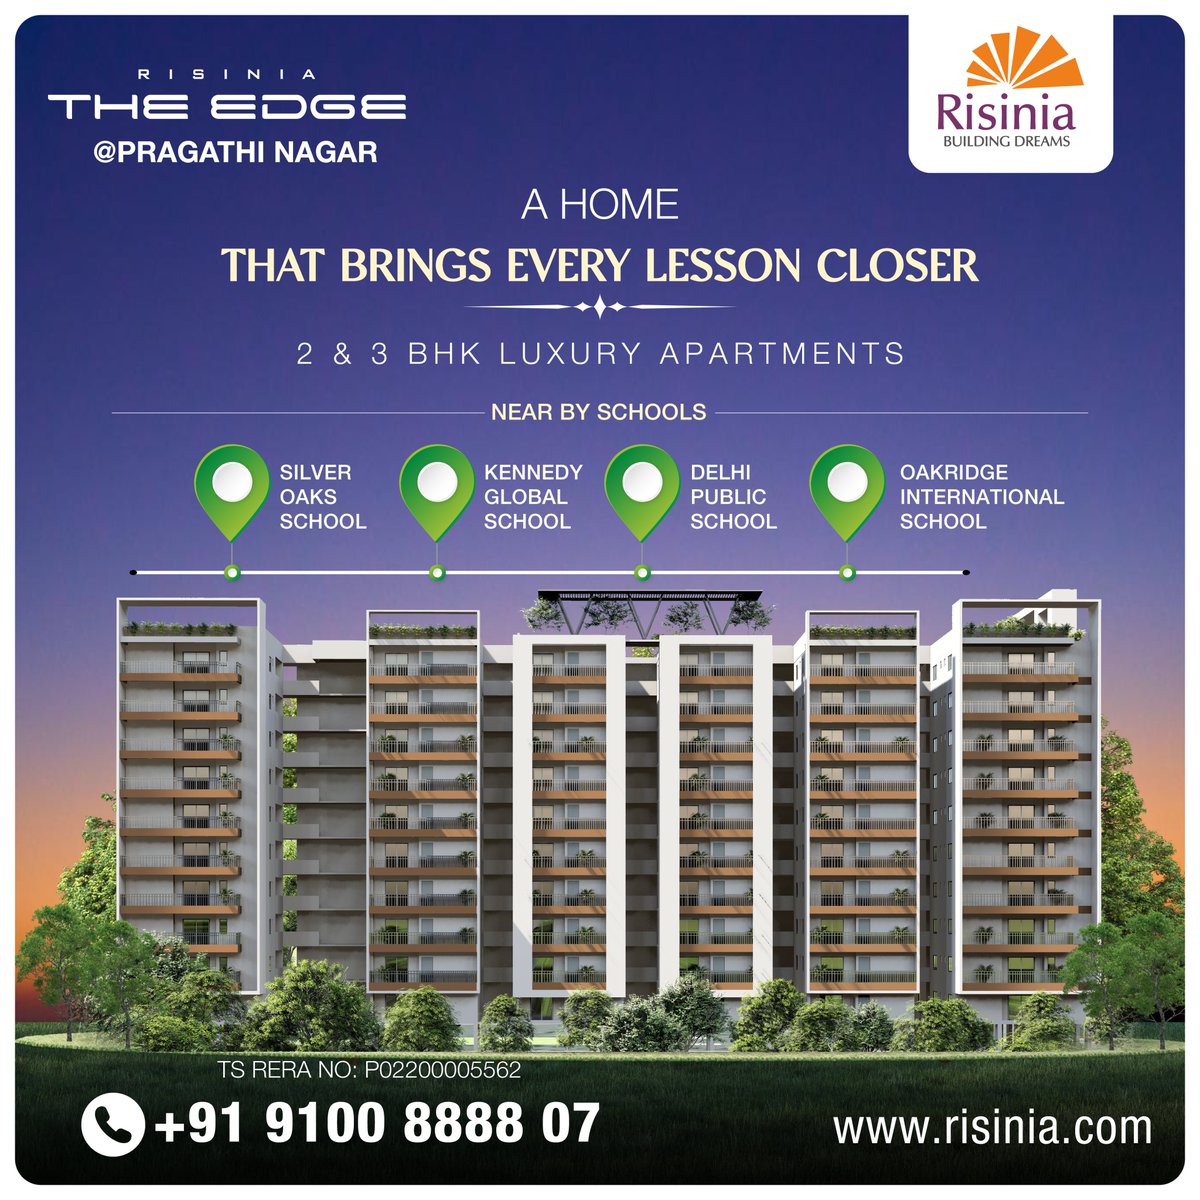 With reputed educational institutions surrounding your home, the doors to infinite educational opportunities open, fulfilling your dreams.

#risiniabuilders #risiniatheedge #pragathinagar #2bhkflatsforsaleinpragathinagar #3bhkflatsforsaleinpragathinagar #apartmentsinhyderabad